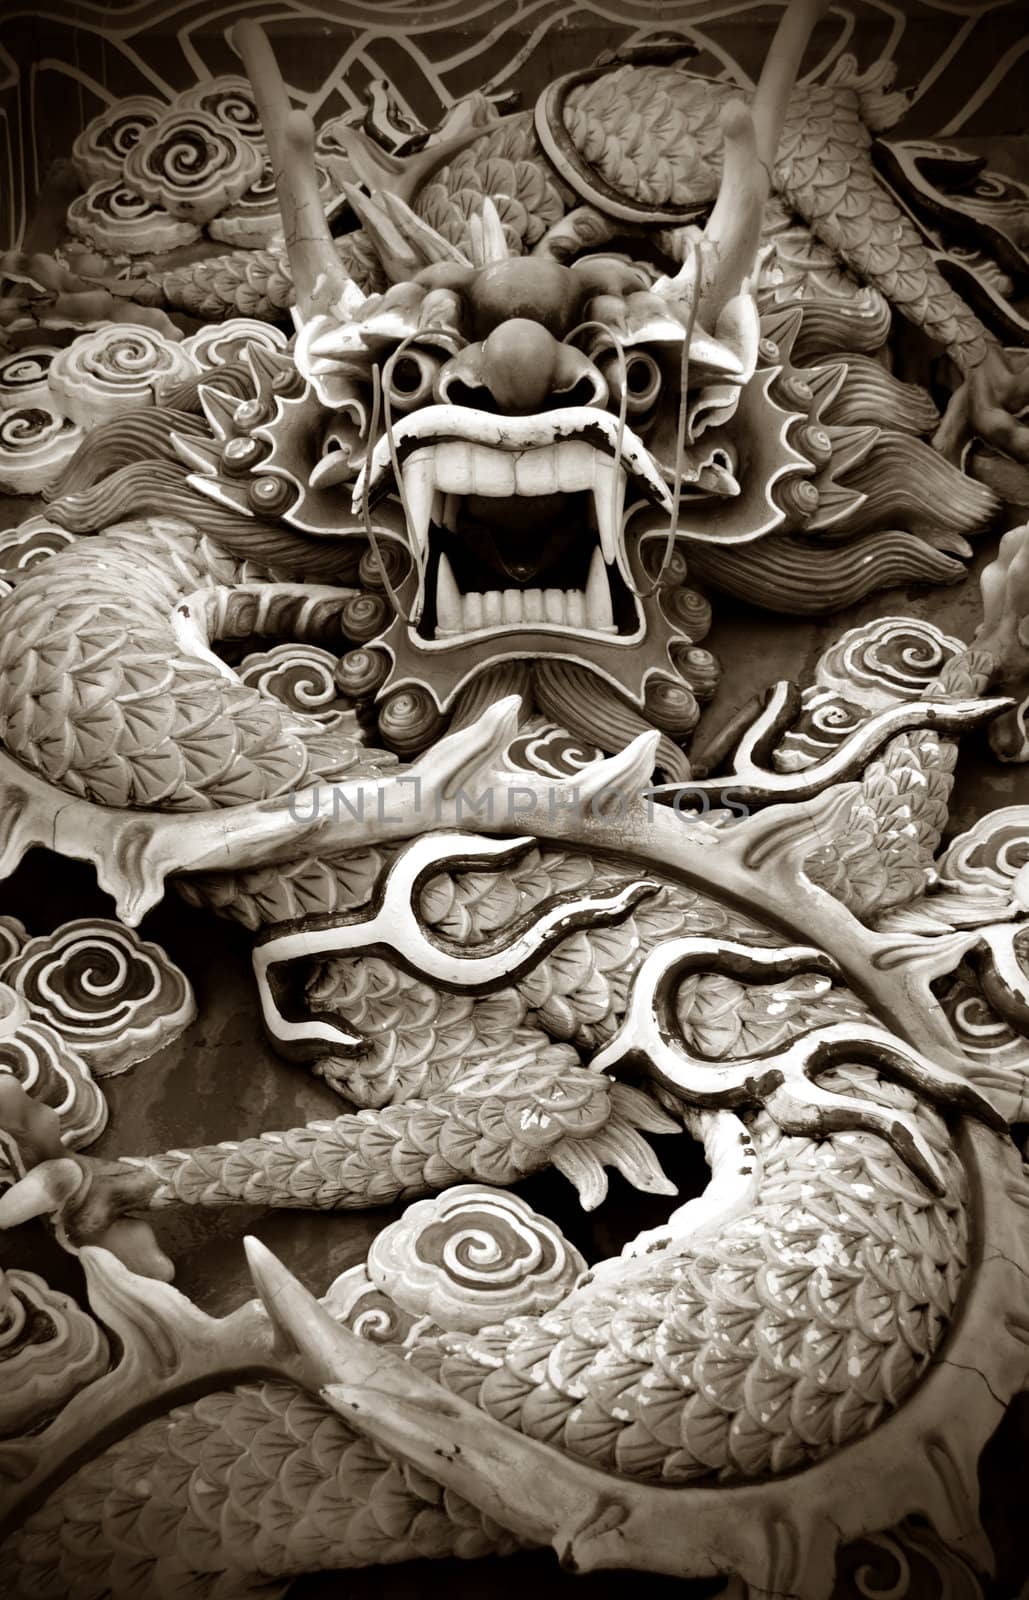 Typical auspicious dragon status in chinese temple that brings good luck.